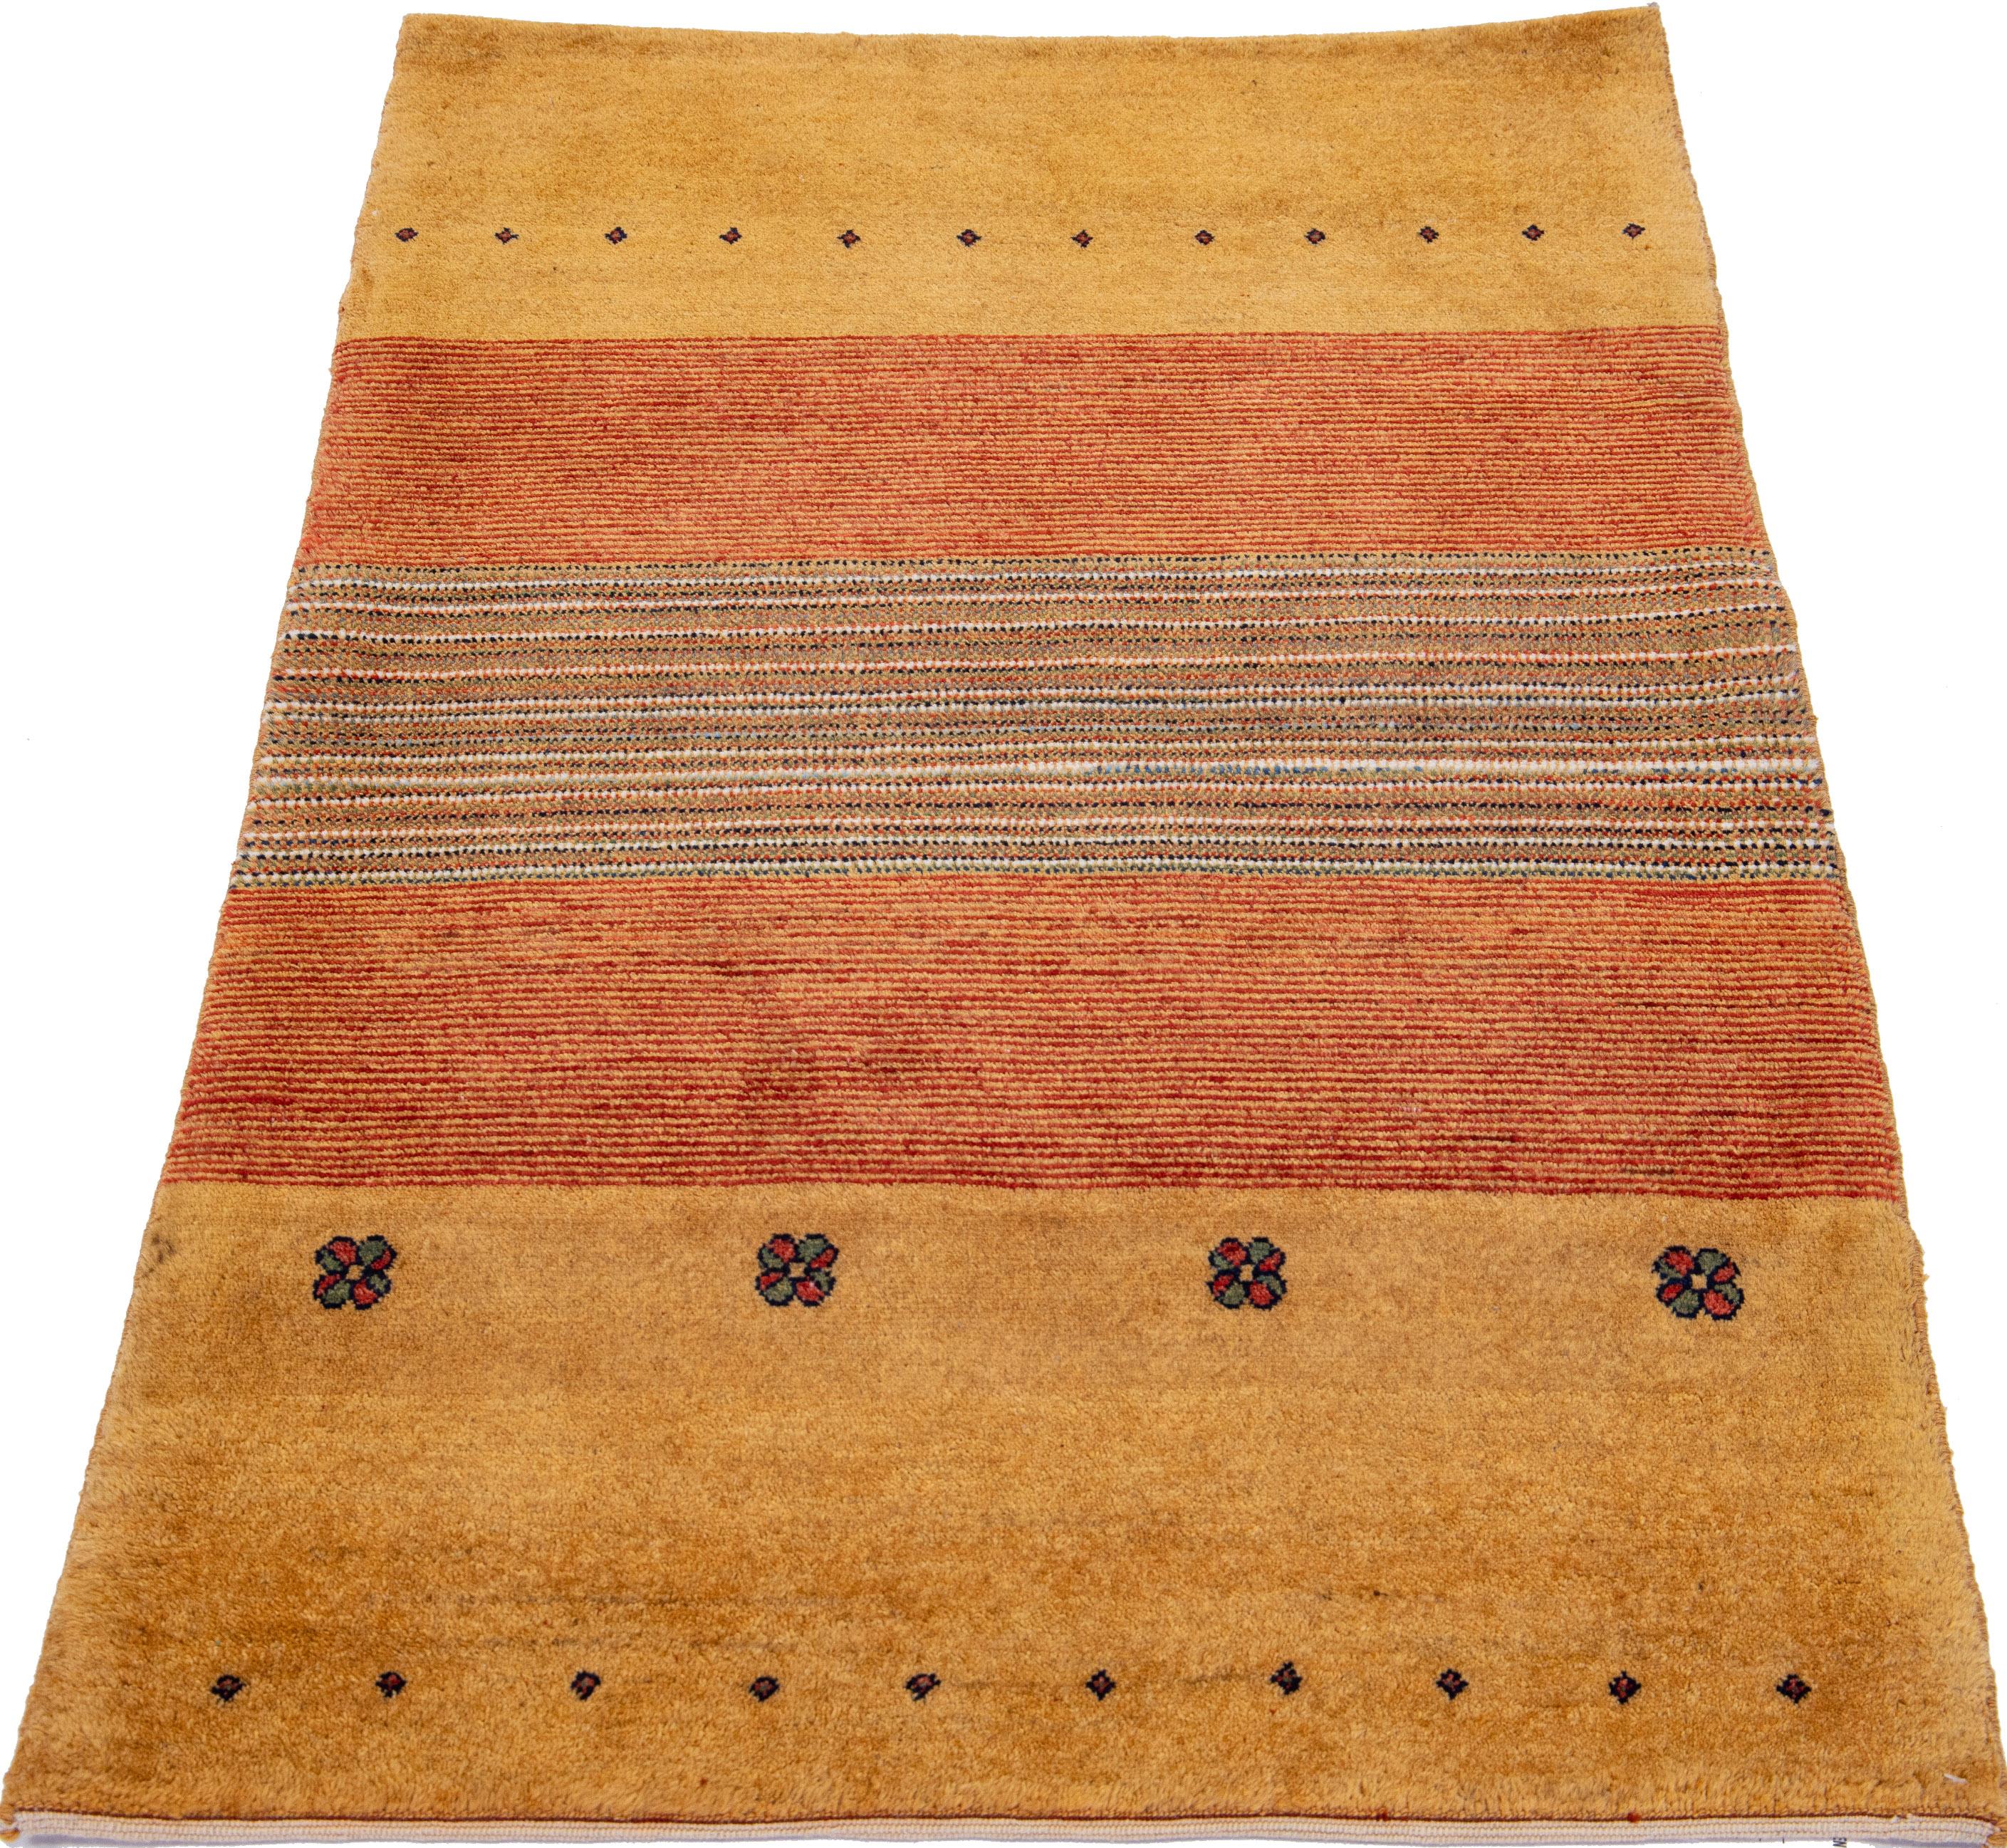 Beautiful modern Gabbeh-style hand-woven wool rug with a tan color field. This Persian rug has a gorgeously geometric design with blue and red accents.

This rug measures: 2'8